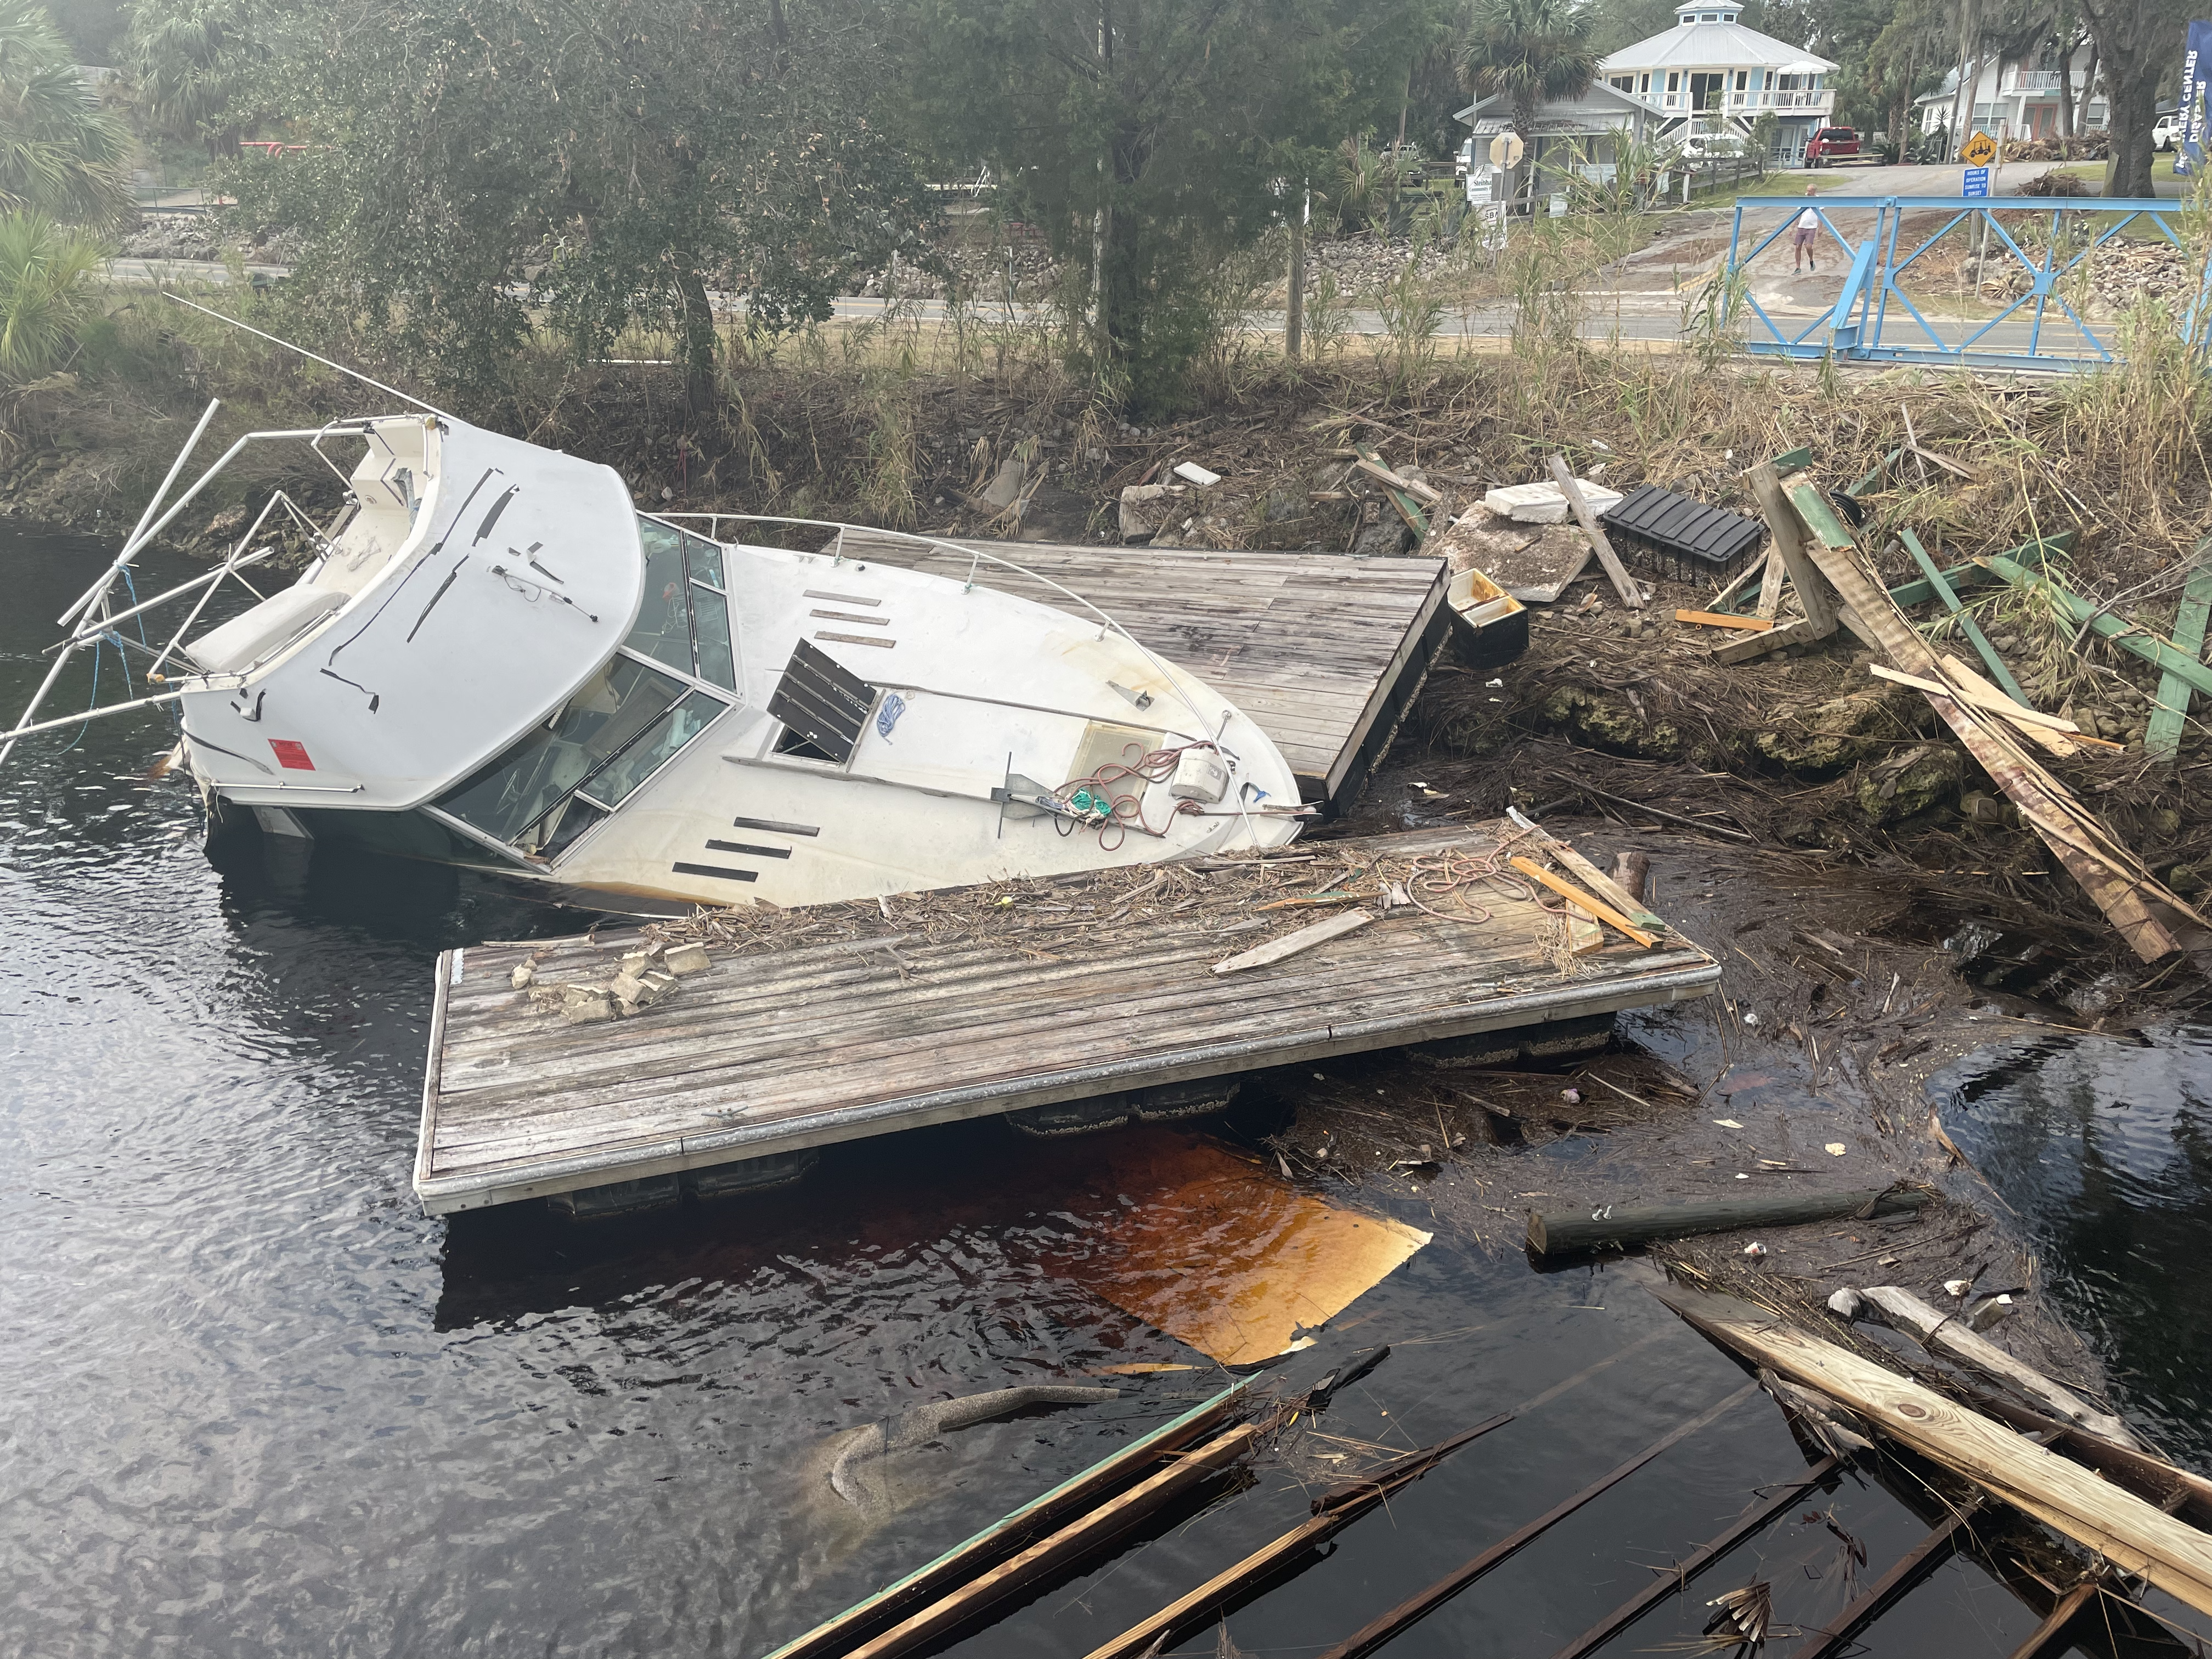 A derelict vessel and other debris generated from Hurricane Idalia along the Steinhatchee River in Florida.